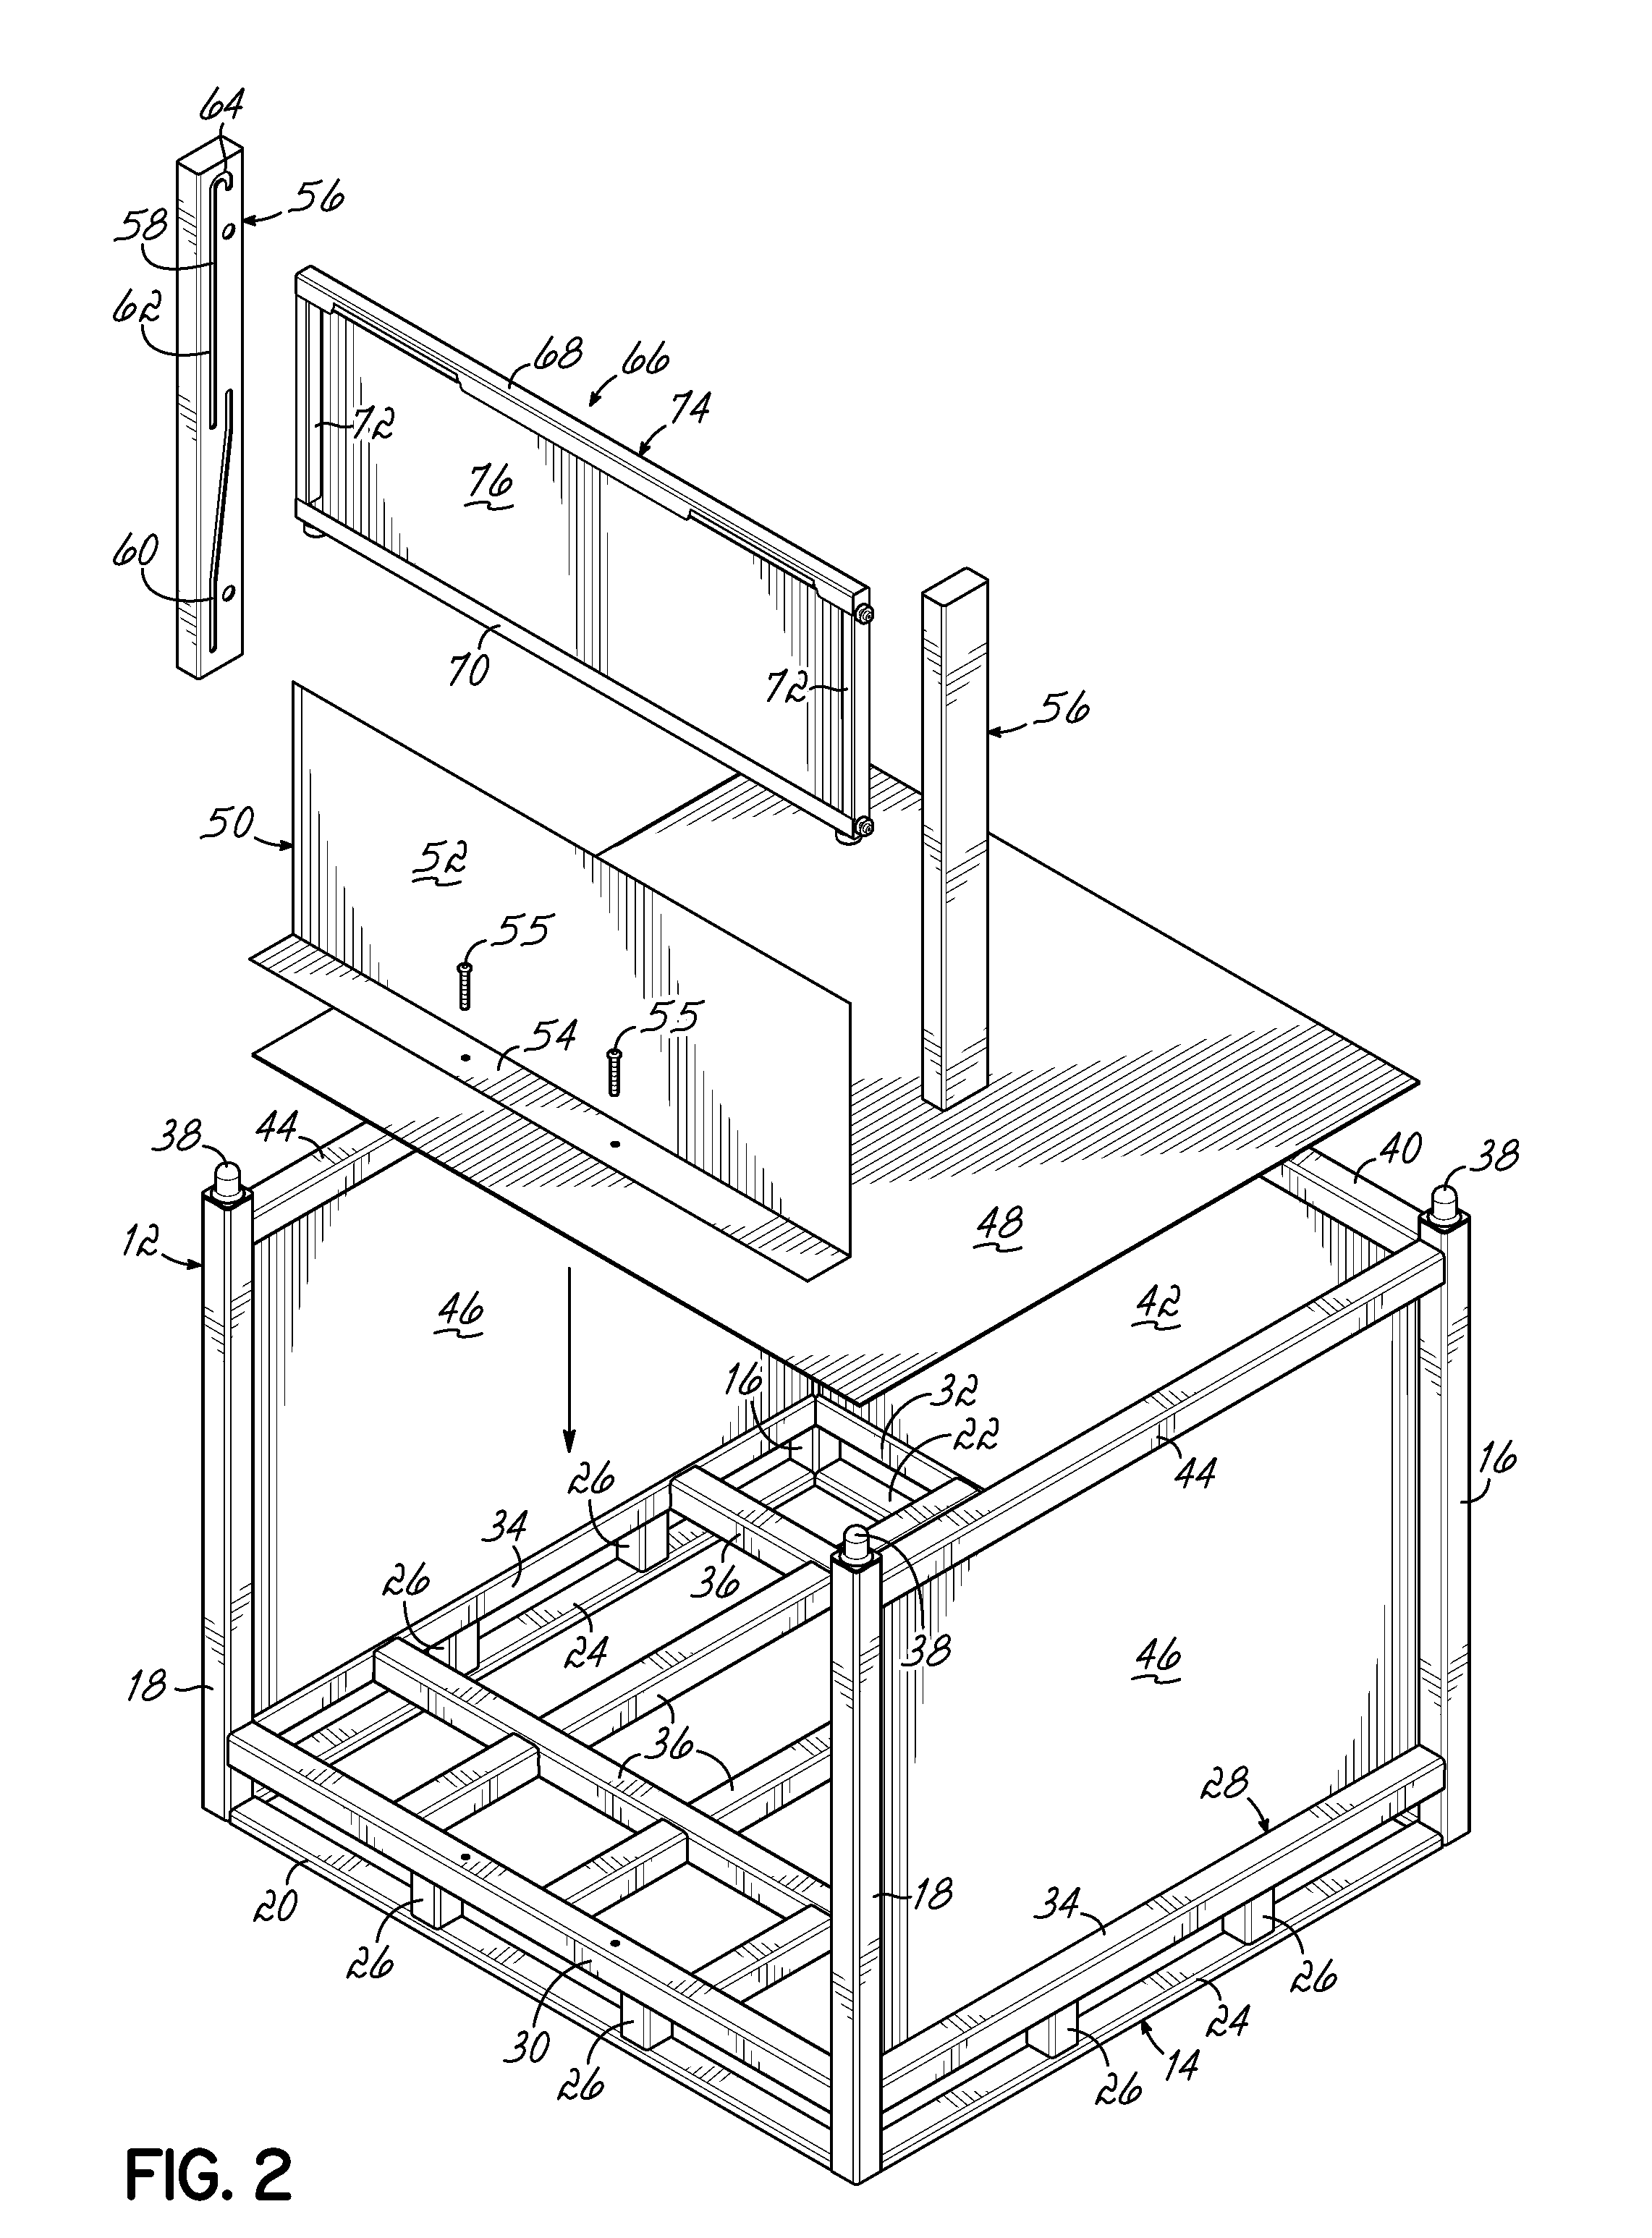 Container Having Door Assembly and Multiple Layers of Tracks